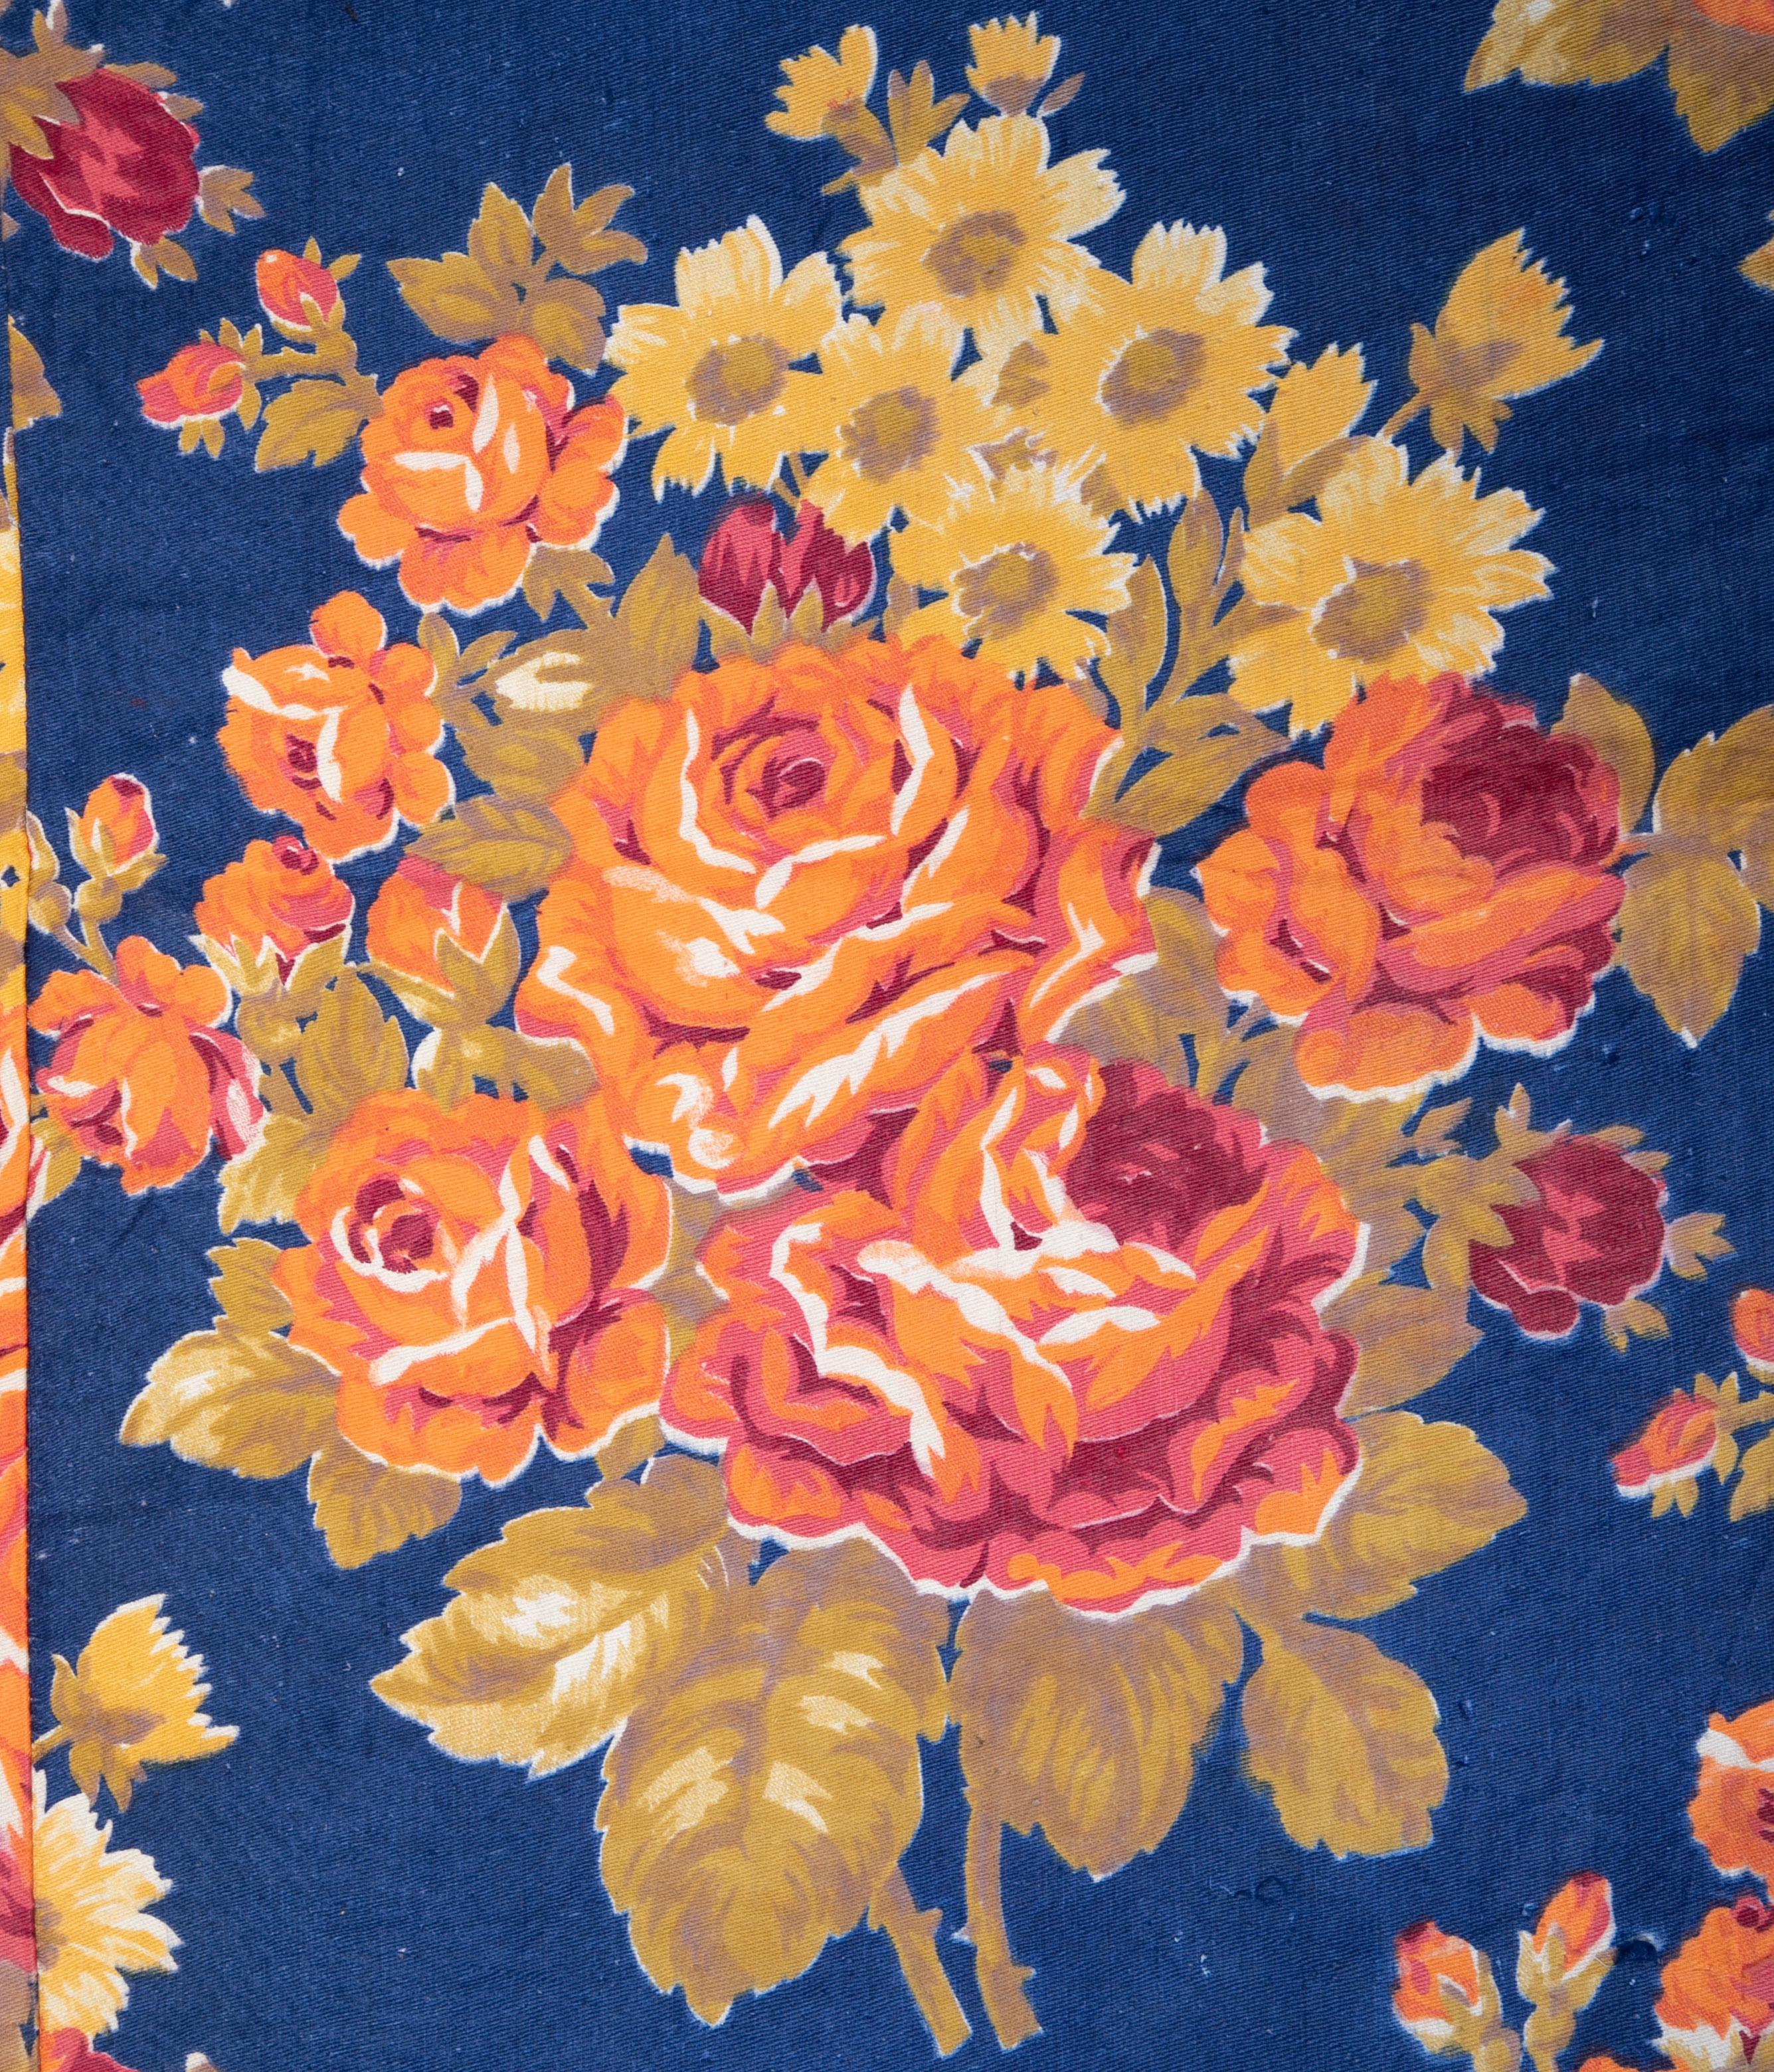 Woven Russian Printed Cotton Fabric Panel, Mid-20th Century or Earlier For Sale